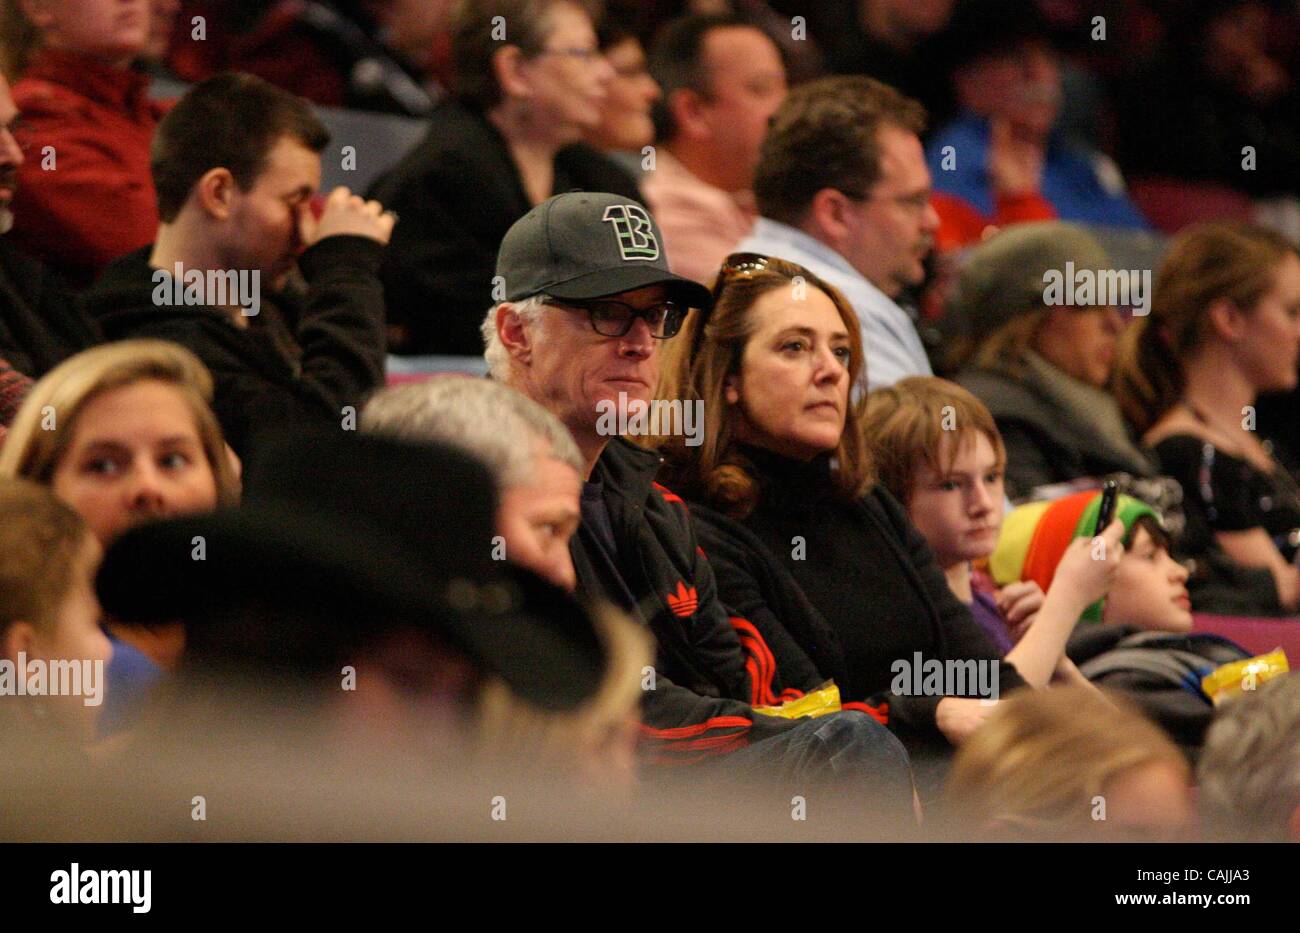 Jan. 9, 2011 - New York, New York, U.S. - Professional Bull Riding  Competition              .Madison Square Garden,New York City 01-09-2011.John Slattery of AMC's Show Mad Men with his wife Talia Balsam and 2 children .photo by  -  Phhotos, Inc. 2011.k66482bco(Credit Image: Â© Bruce Cotler/Globe Ph Stock Photo